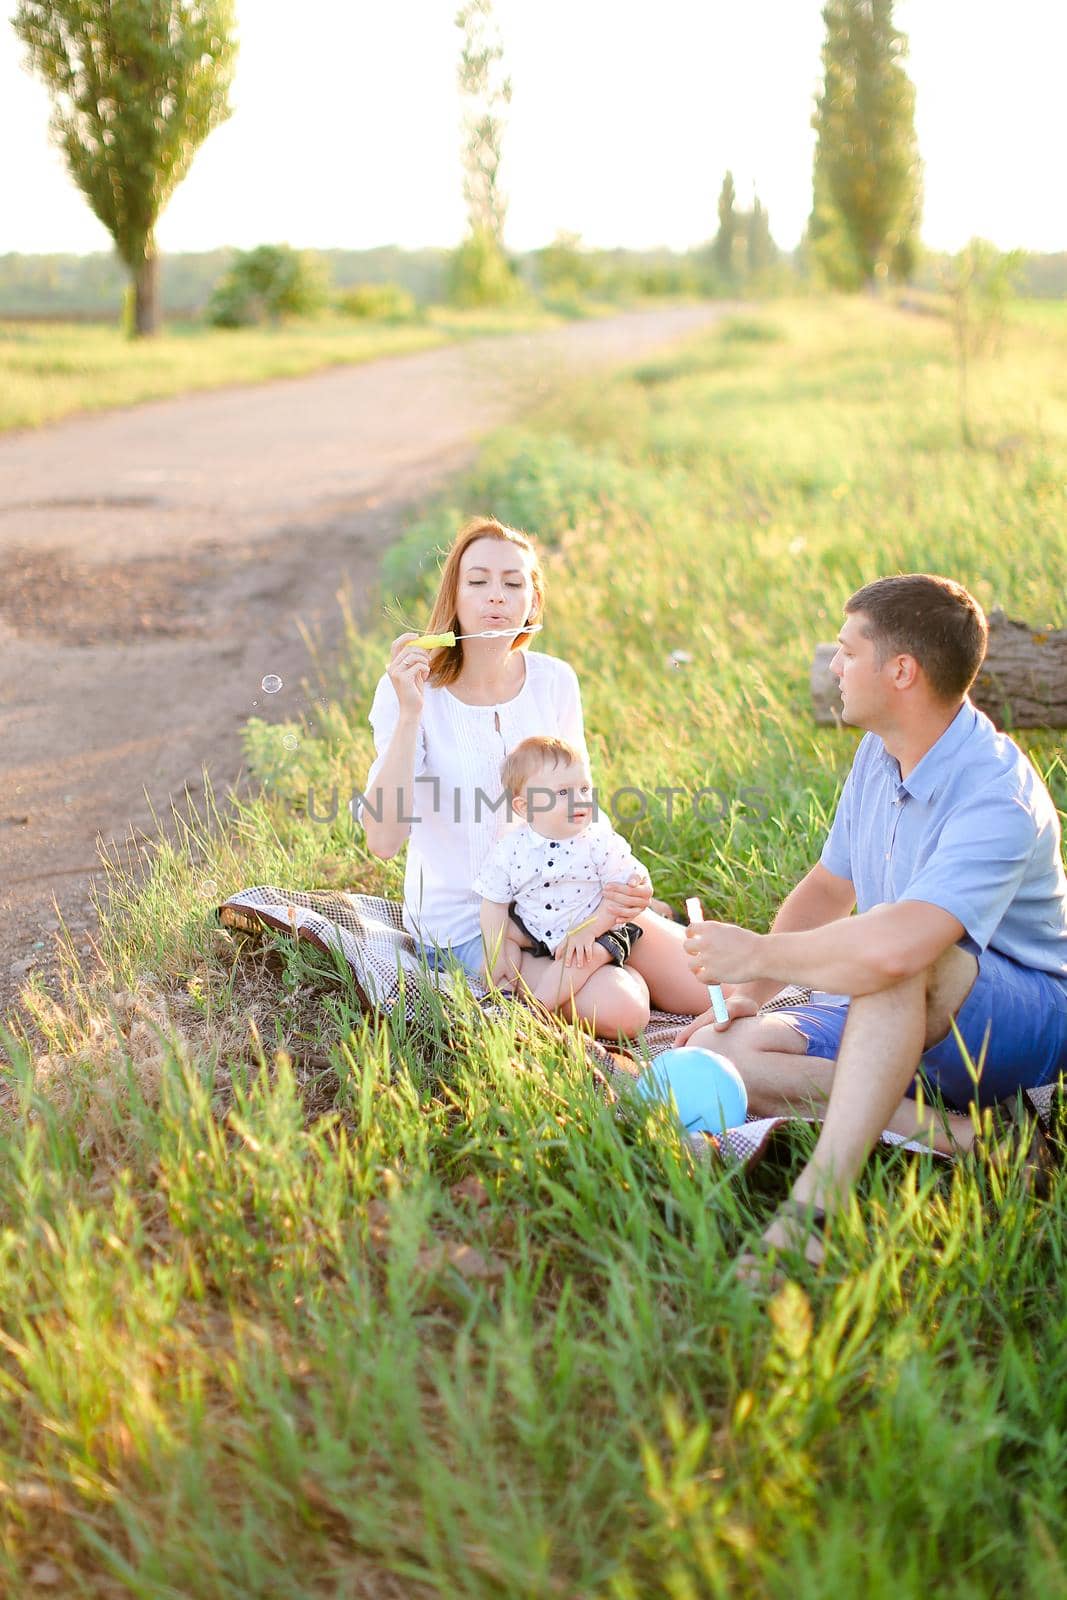 Young Caucasian father and blonde mother sitting on grass with little baby and blowing bubbles. Concept of picnic with child and resting on nature.